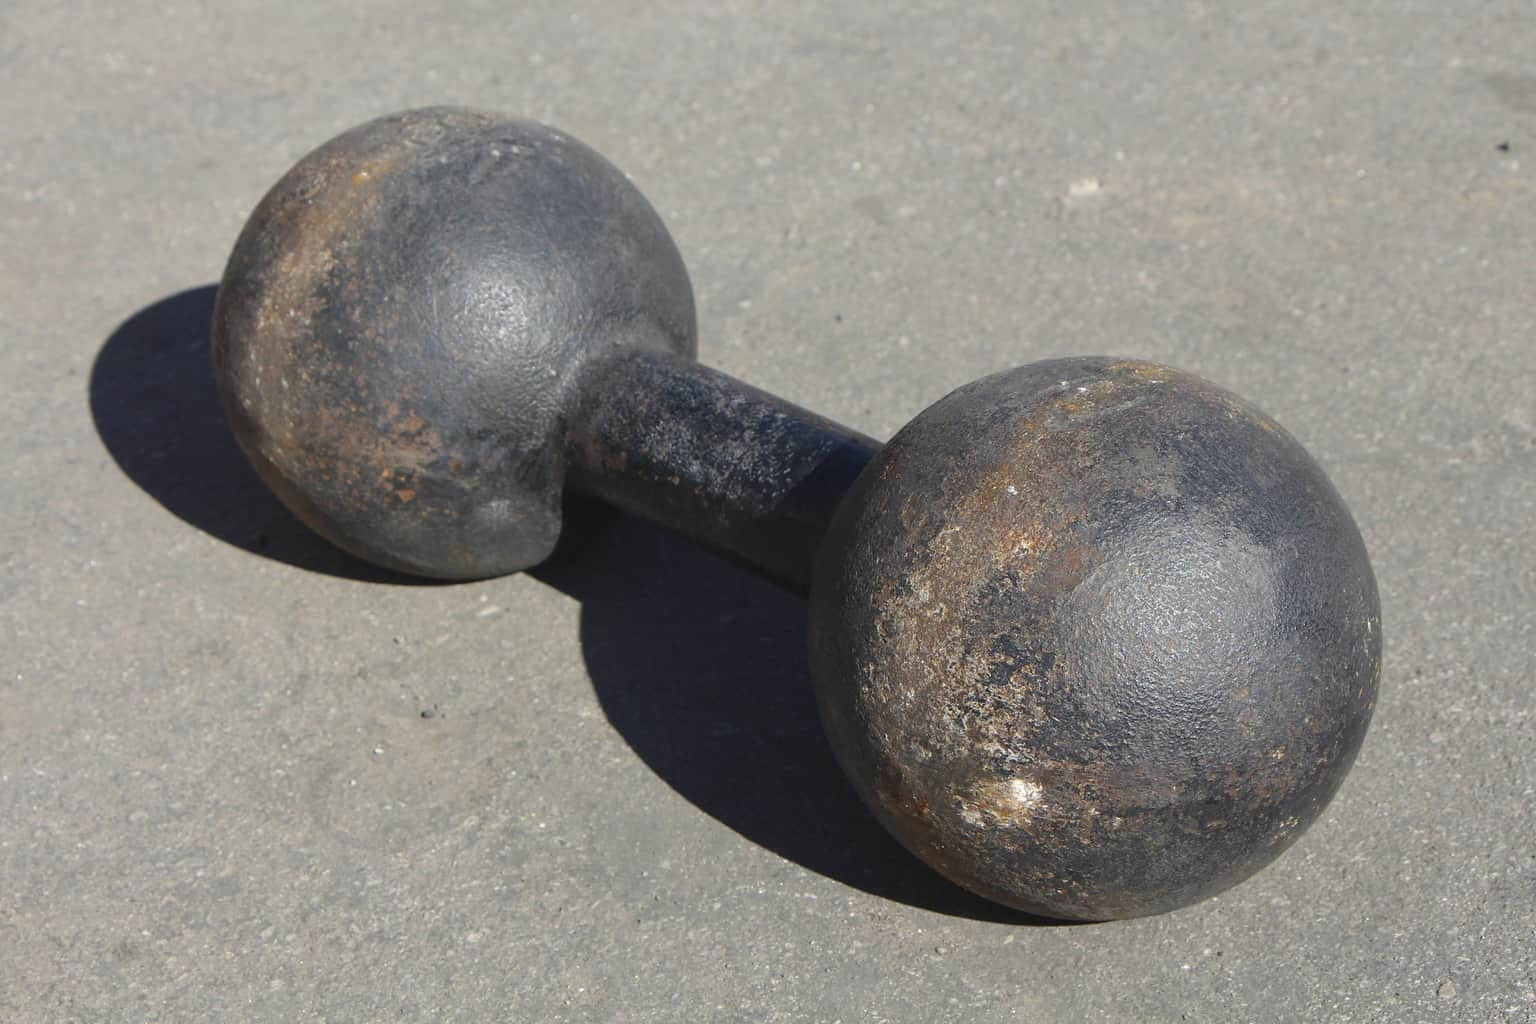 A rusty dumbbell on the ground